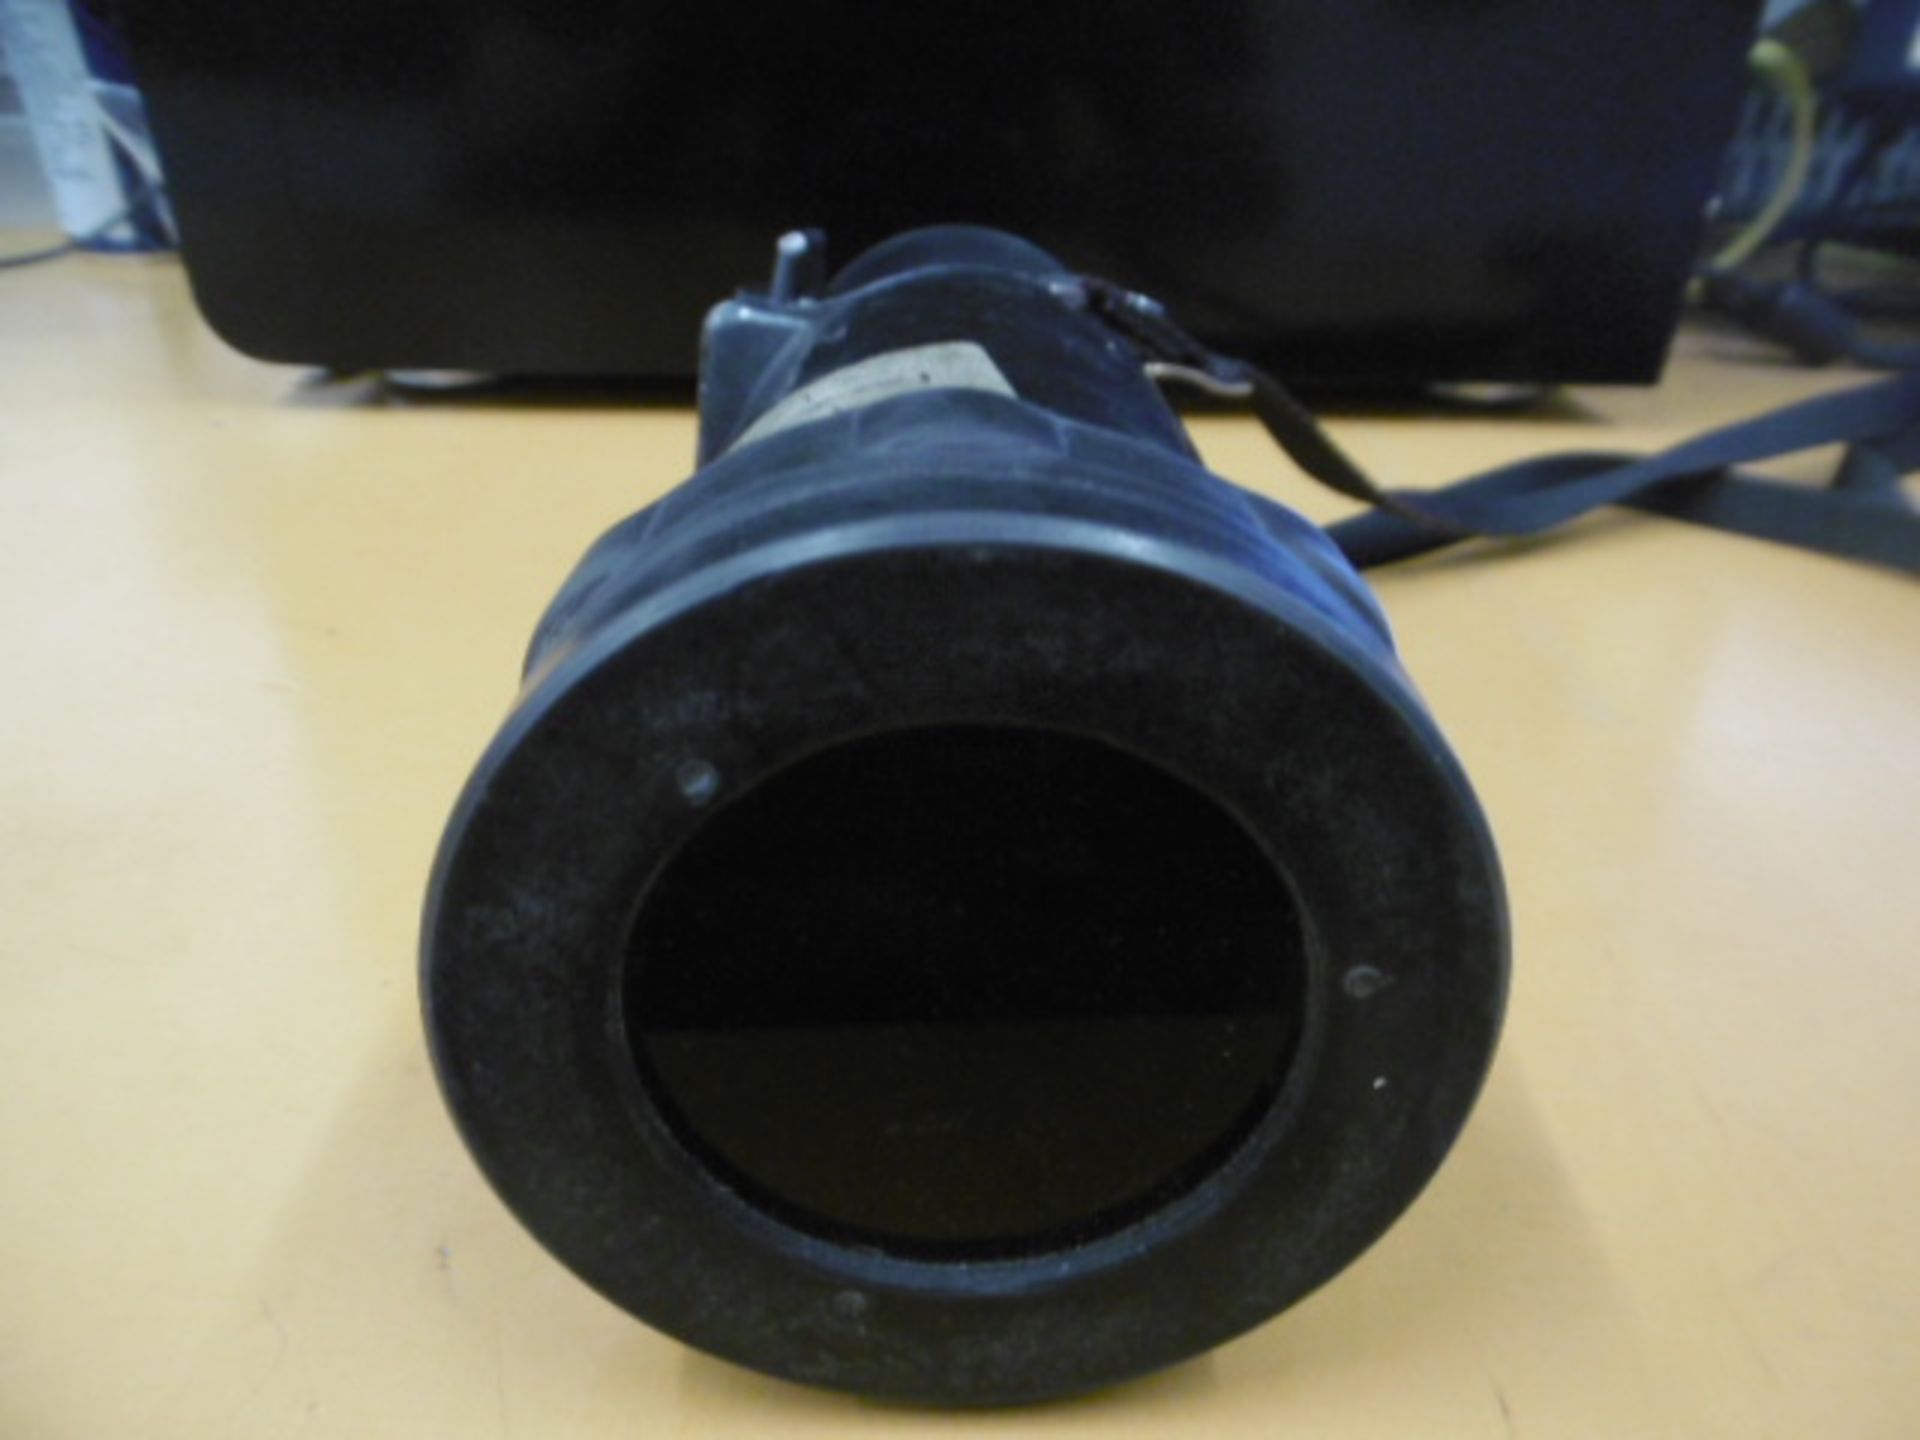 Telescope Straight Image Intensified L6A1 Scope - British Military Night Vision Pocket Scope - Image 5 of 11